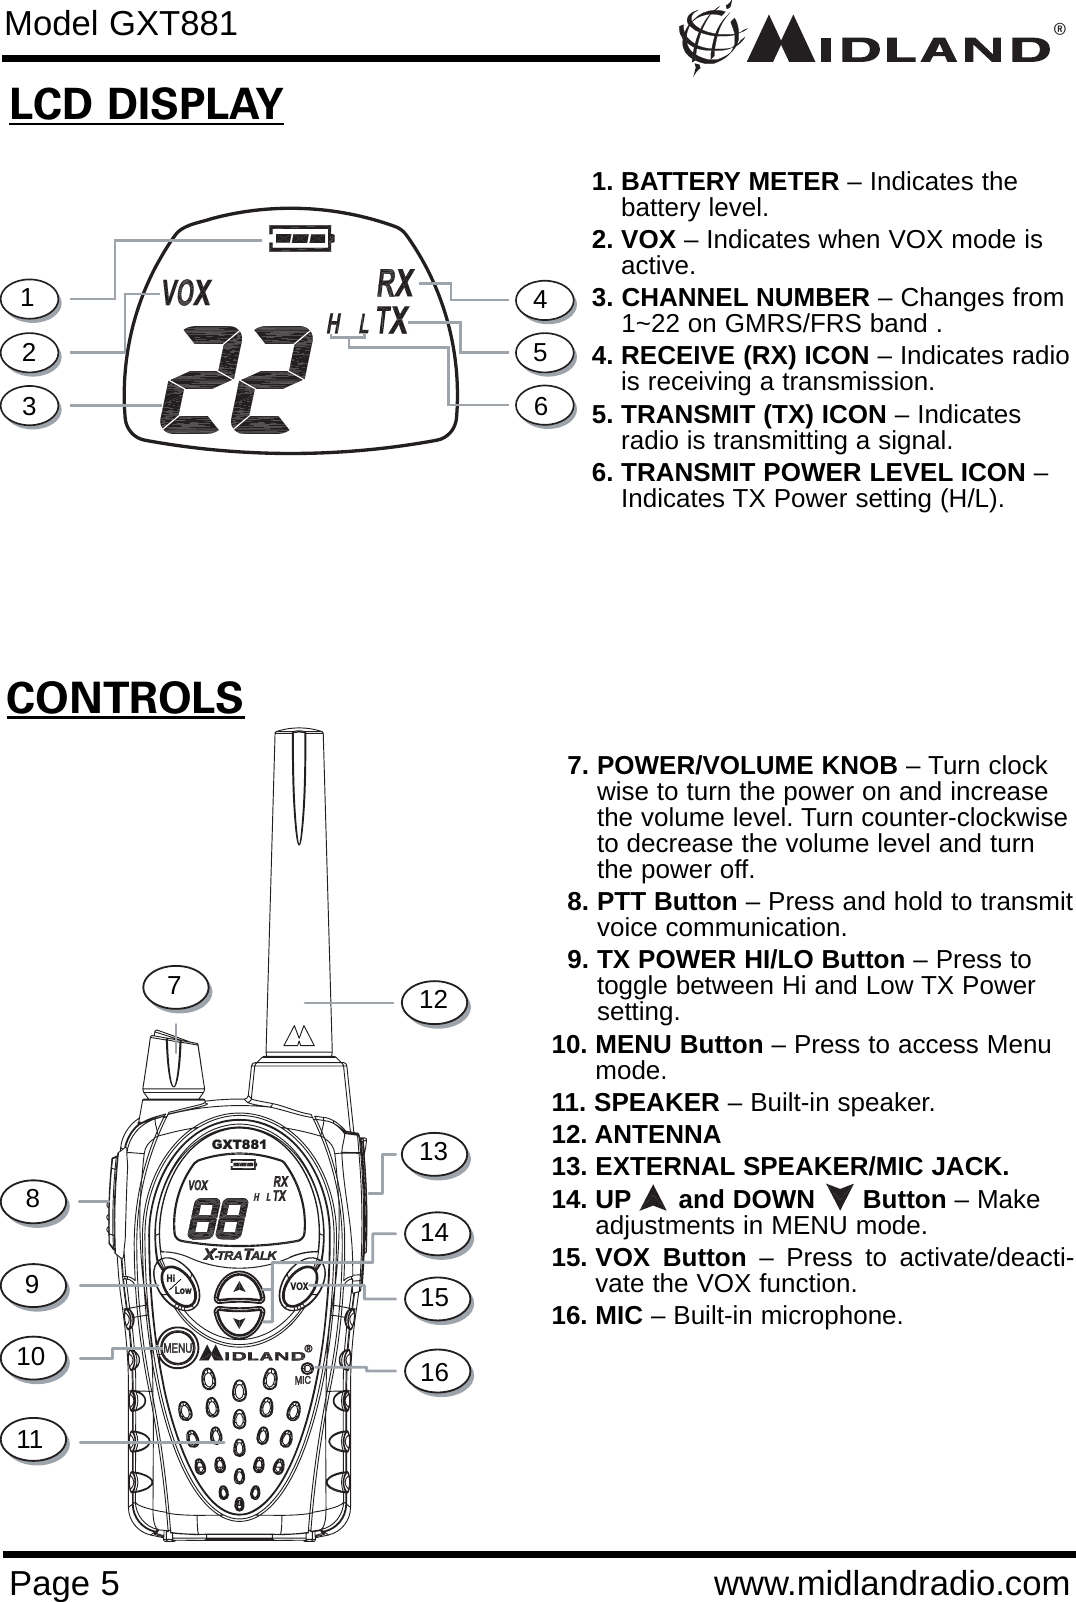 GXT881HiLow VOX®Page 5 www.midlandradio.comCONTROLSLCD DISPLAY1. BATTERY METER – Indicates thebattery level.2. VOX – Indicates when VOX mode isactive.3. CHANNEL NUMBER – Changes from 1~22 on GMRS/FRS band .4. RECEIVE (RX) ICON – Indicates radiois receiving a transmission.5. TRANSMIT (TX) ICON – Indicatesradio is transmitting a signal.6. TRANSMIT POWER LEVEL ICON –Indicates TX Power setting (H/L).7. POWER/VOLUME KNOB – Turn clockwise to turn the power on and increasethe volume level. Turn counter-clockwiseto decrease the volume level and turnthe power off.8. PTT Button – Press and hold to transmitvoice communication. 9. TX POWER HI/LO Button – Press totoggle between Hi and Low TX Powersetting.  10. MENU Button – Press to access Menumode.11. SPEAKER – Built-in speaker.12. ANTENNA13. EXTERNAL SPEAKER/MIC JACK.14. UP and DOWN      Button – Makeadjustments in MENU mode.  15. VOX  Button – Press to activate/deacti-vate the VOX function.16. MIC – Built-in microphone.12345678910111615141312Model GXT881